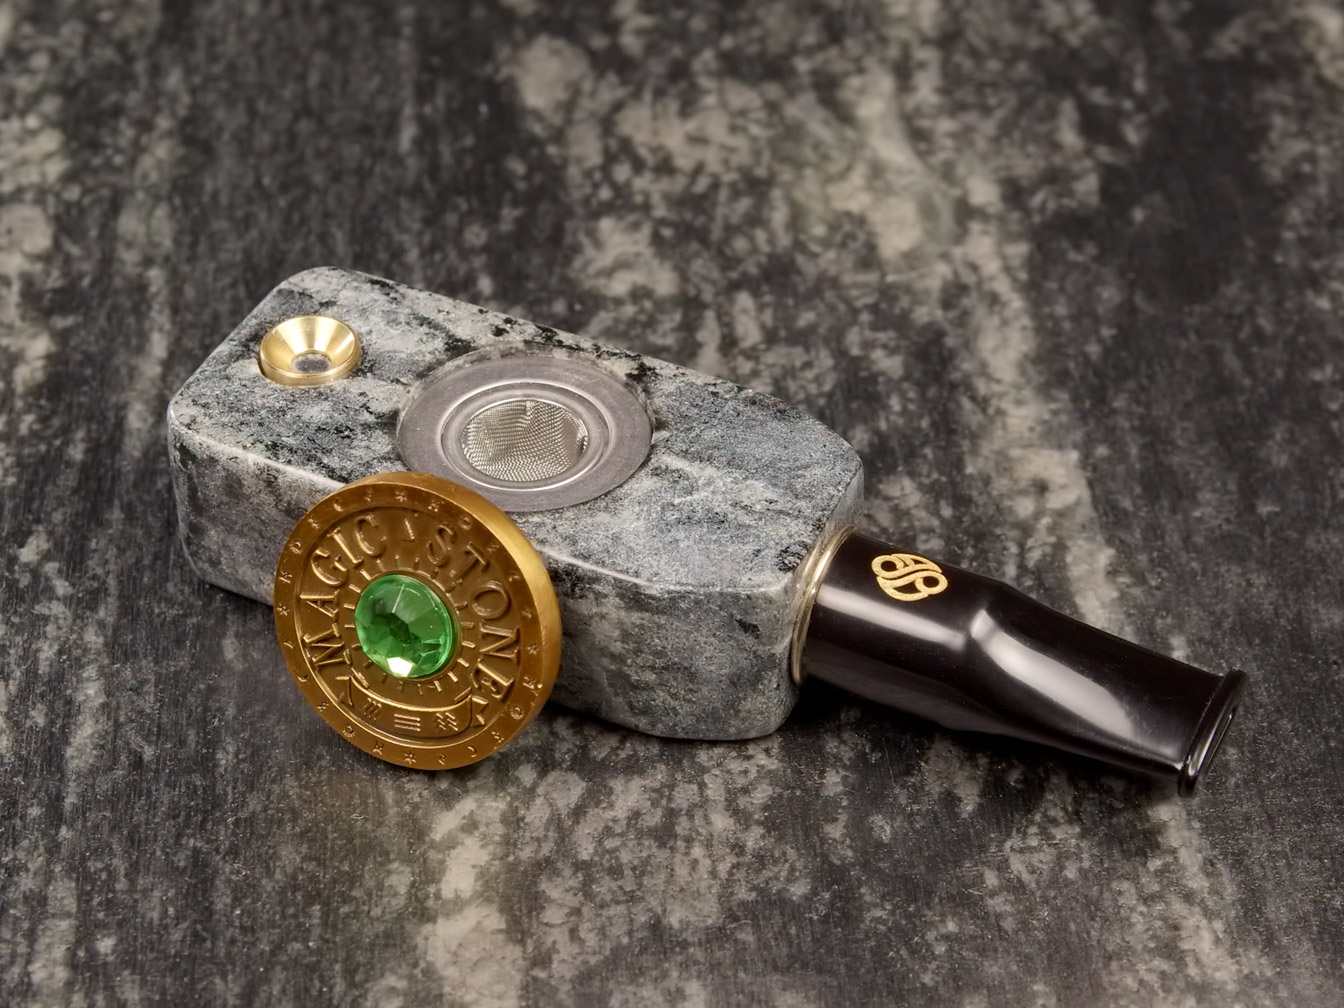 MagicStone Alchemy heat-don't-burn cannabis instrument soapstone vaporizer with custom-minted gemstone gold coin cap and removable acrylic mouthpiece